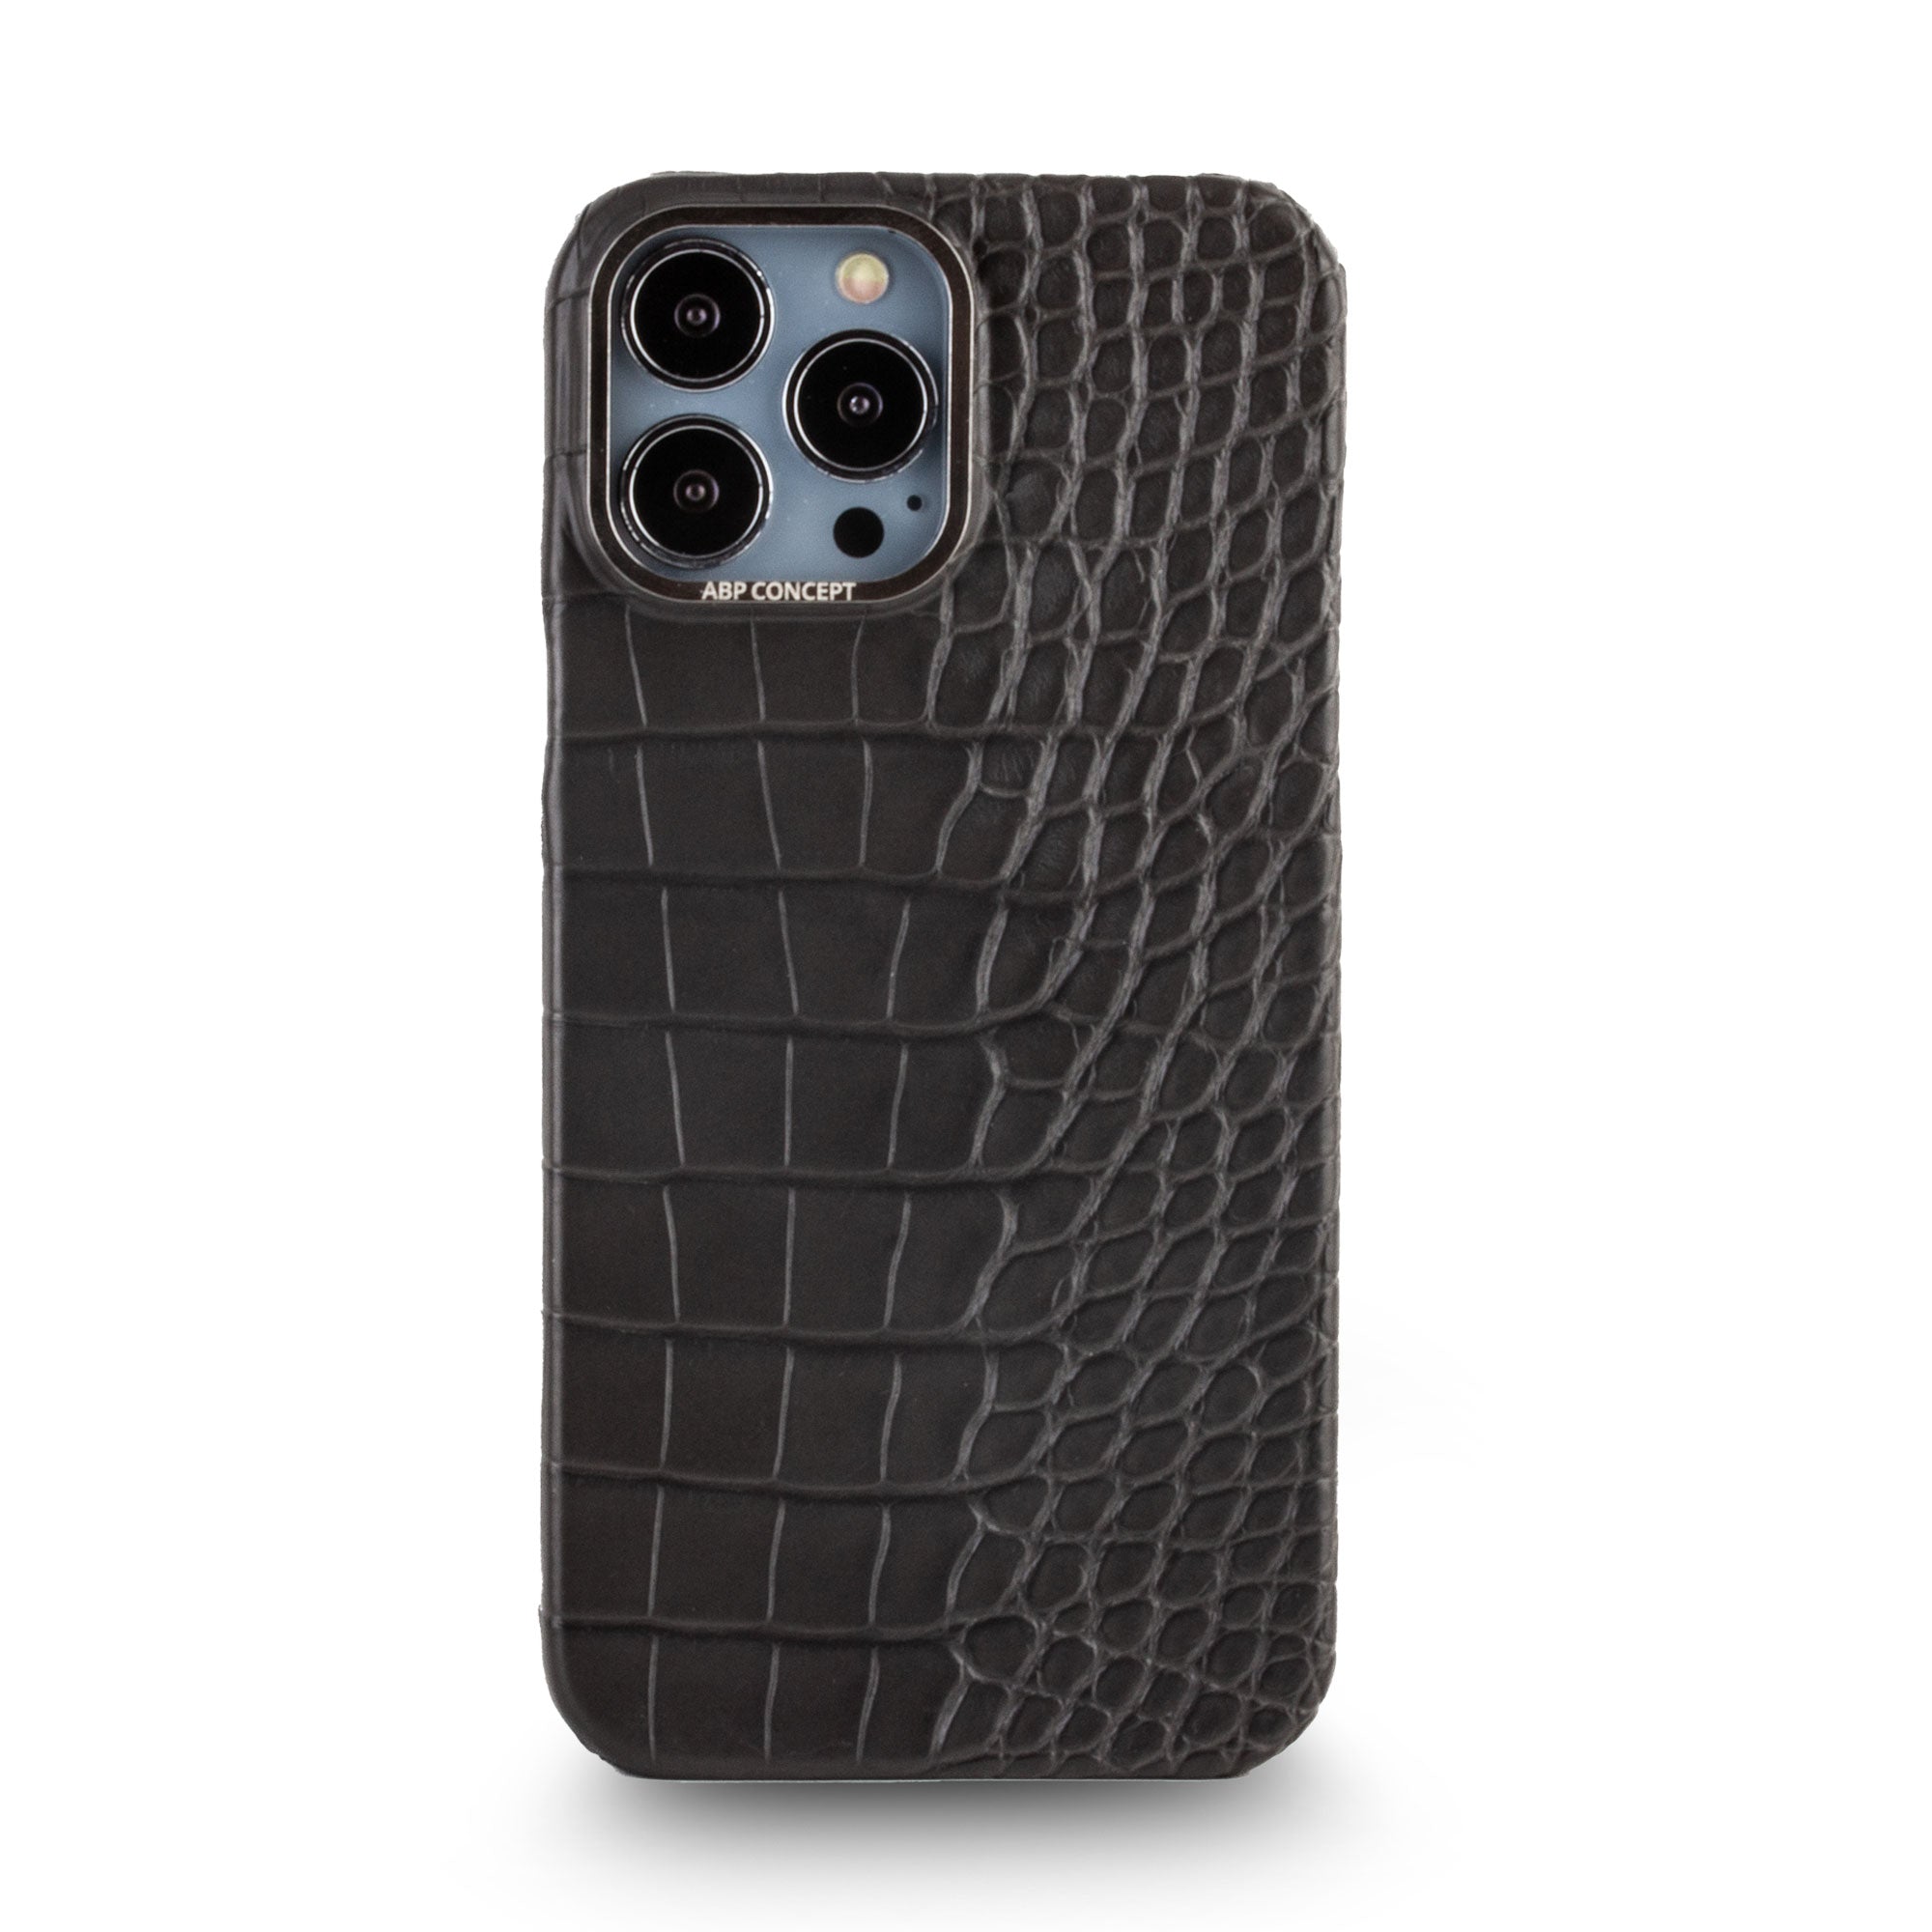 Clearance Sale - Leather iPhone case - iPhone 13 Pro Max - Grey alligator